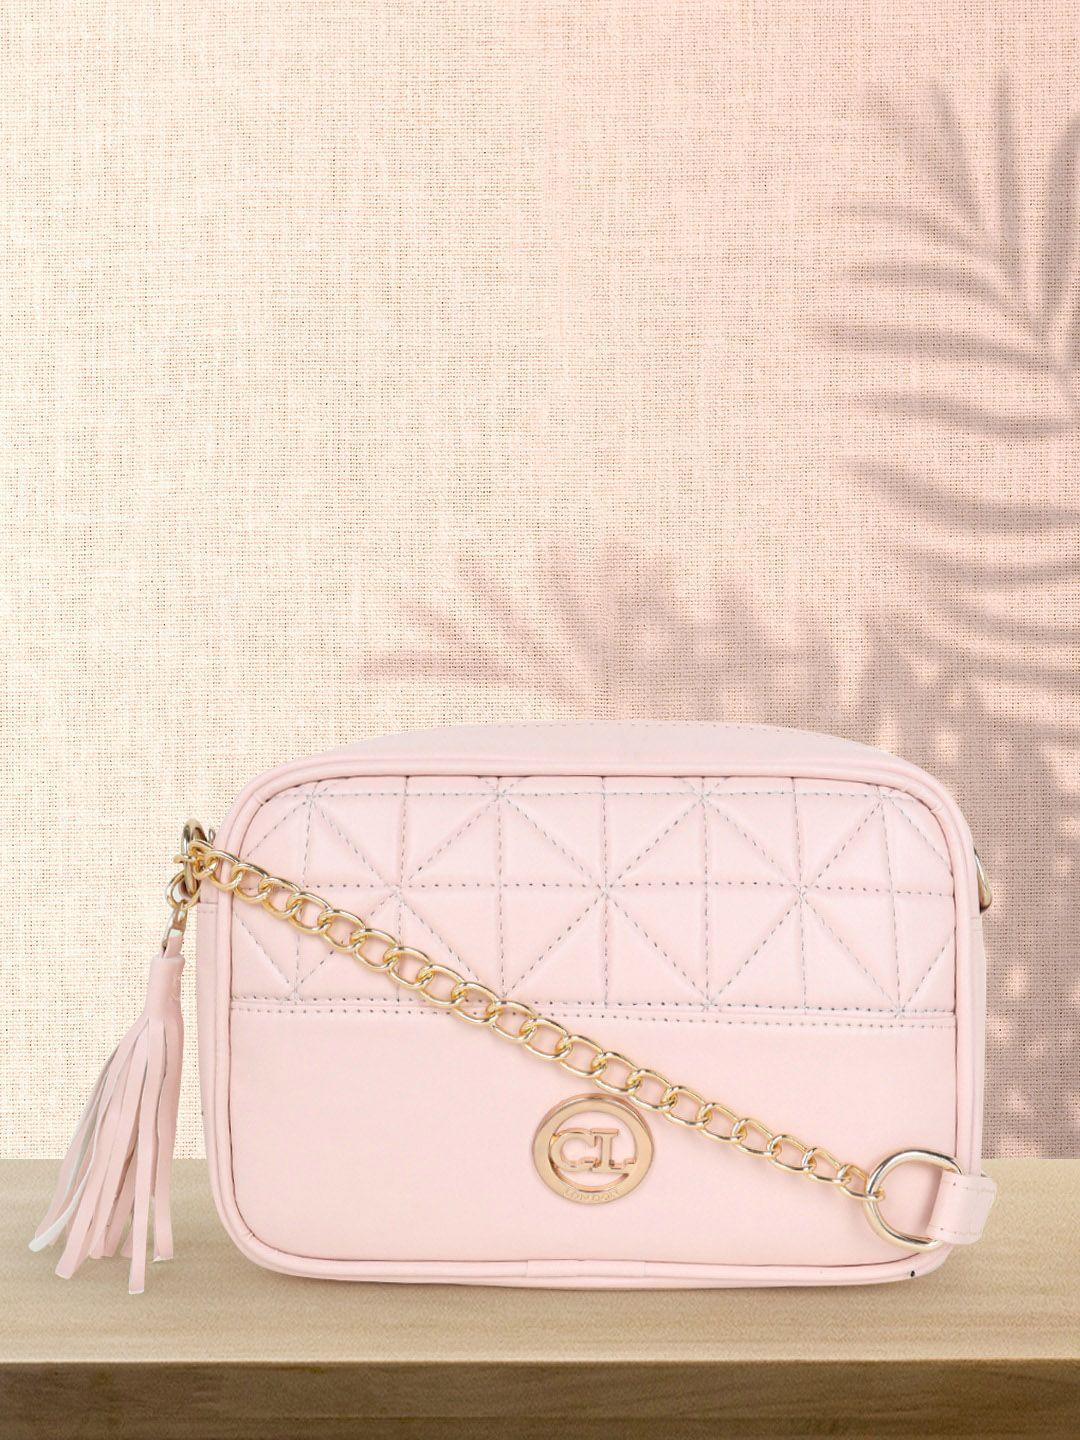 carlton london pink sling bag with quilted